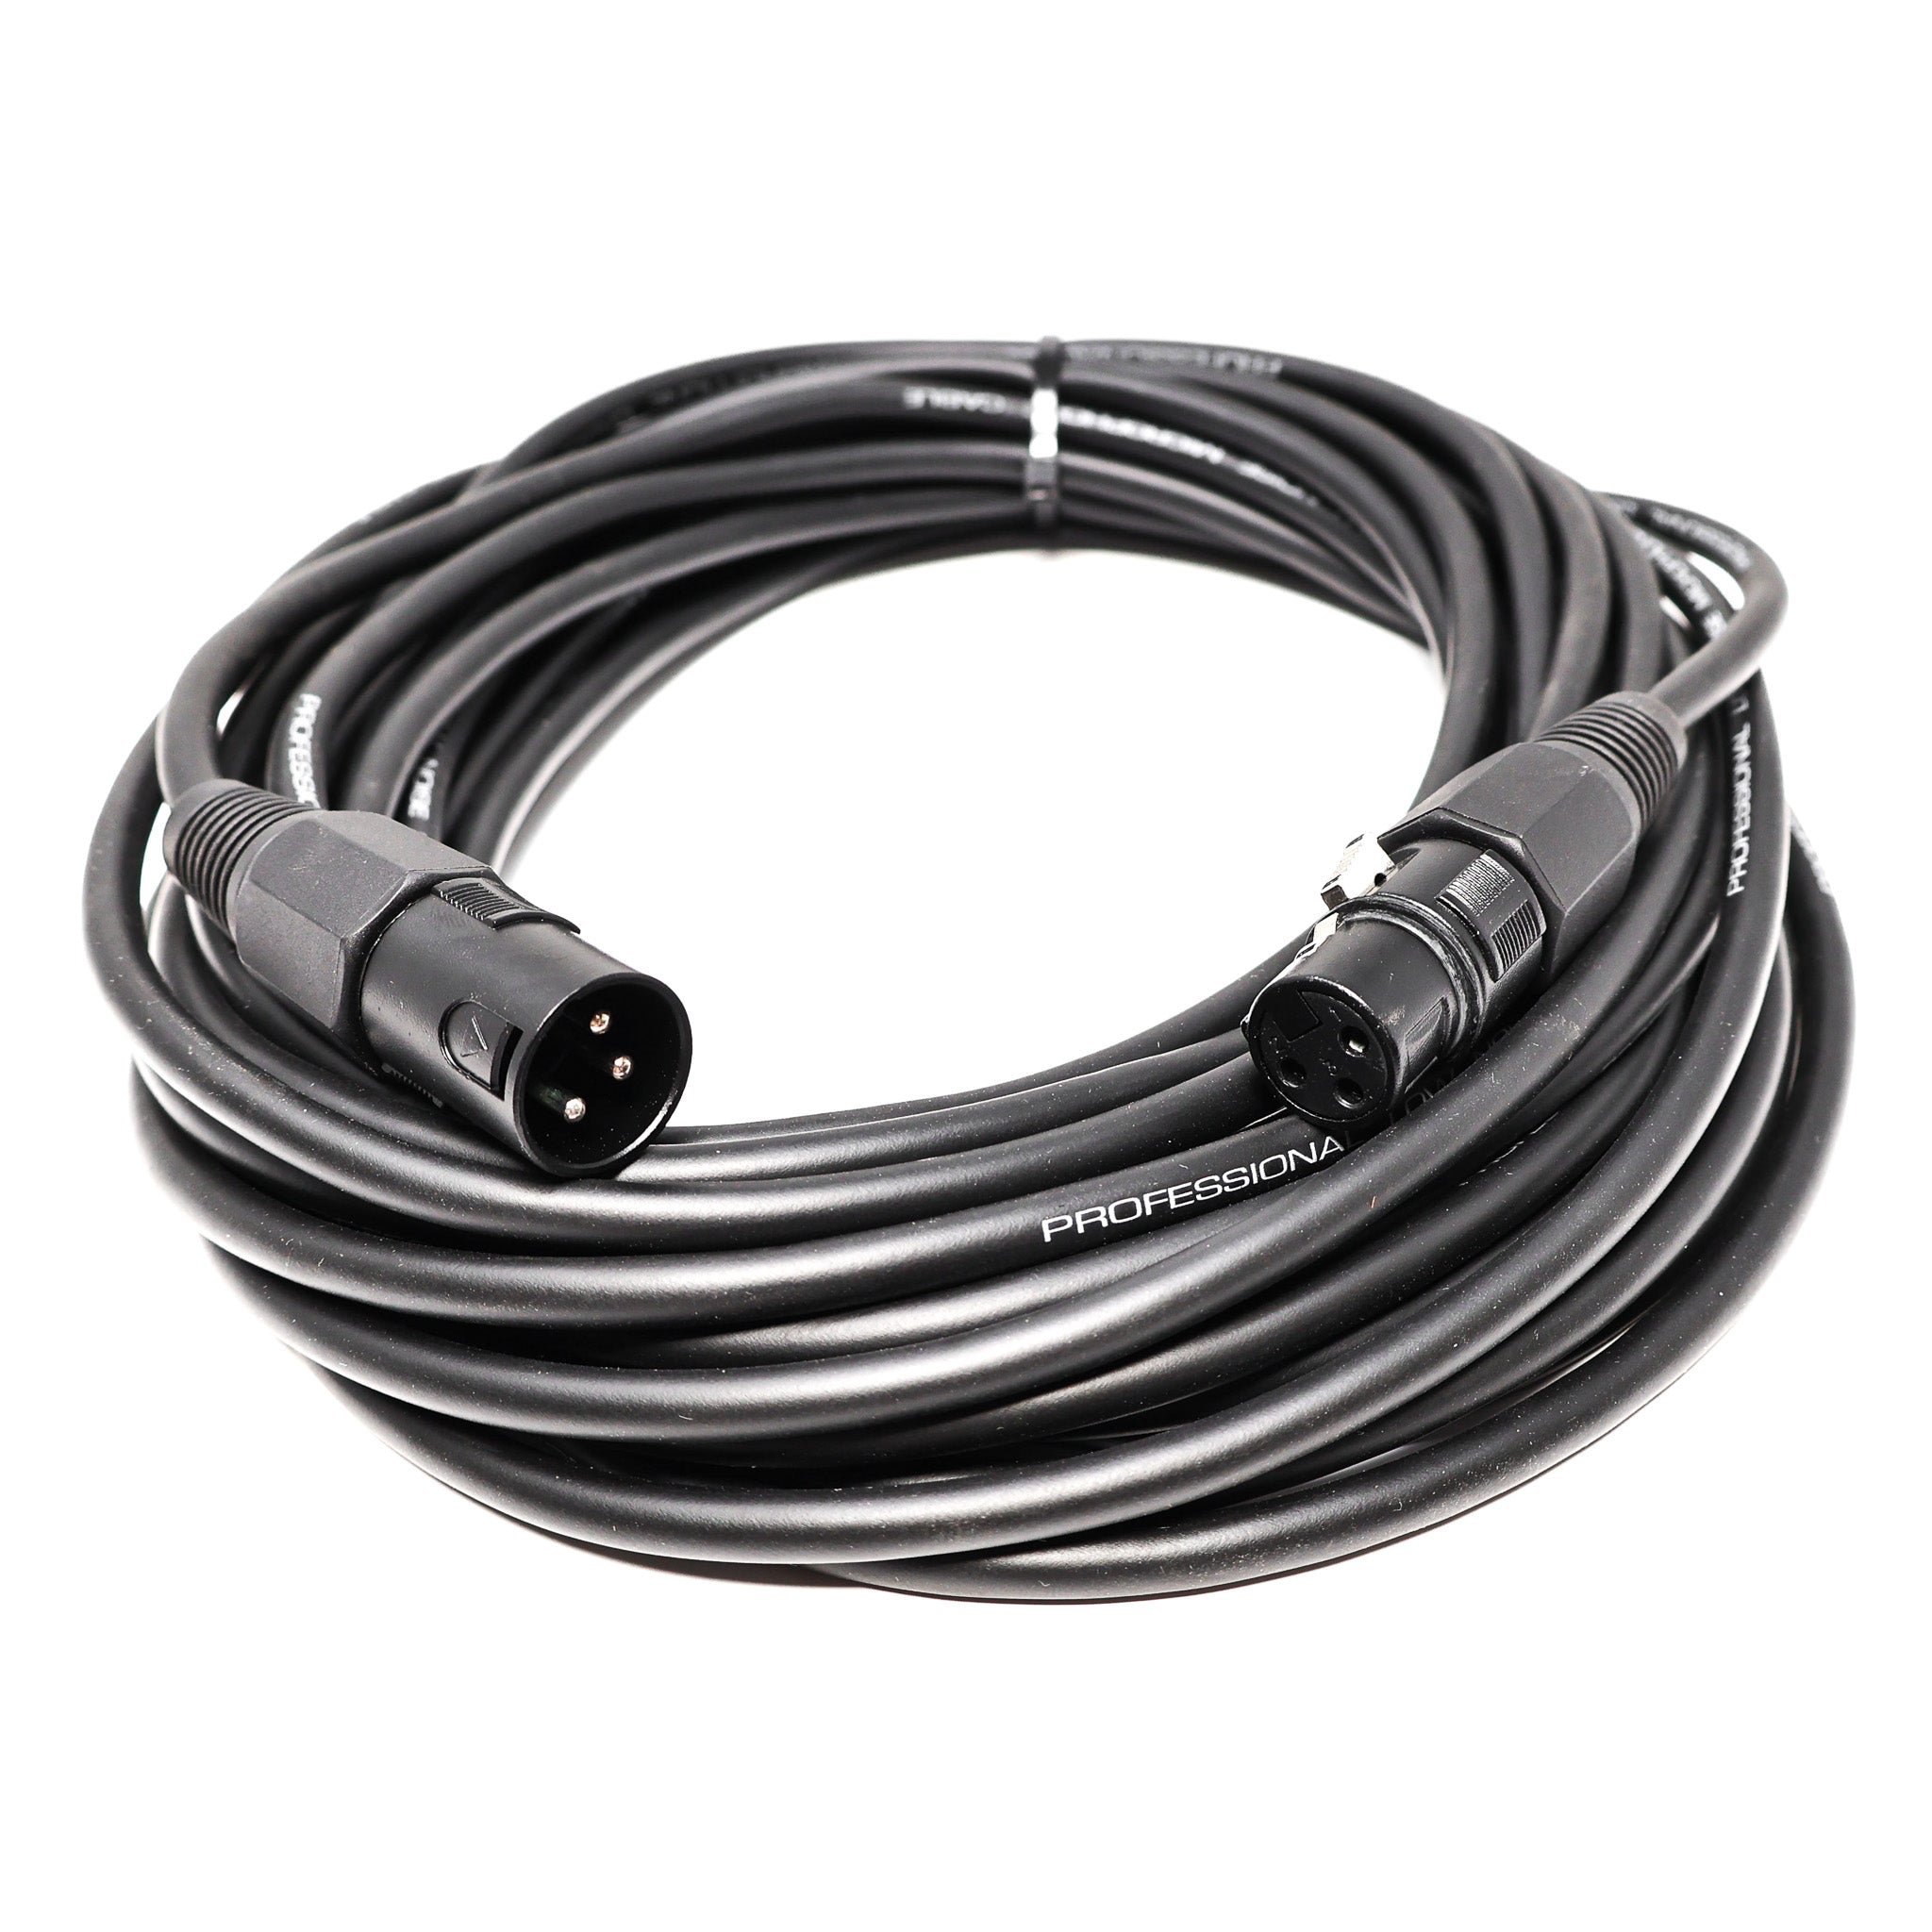 Professional XLR Microphone Cable - 33ft